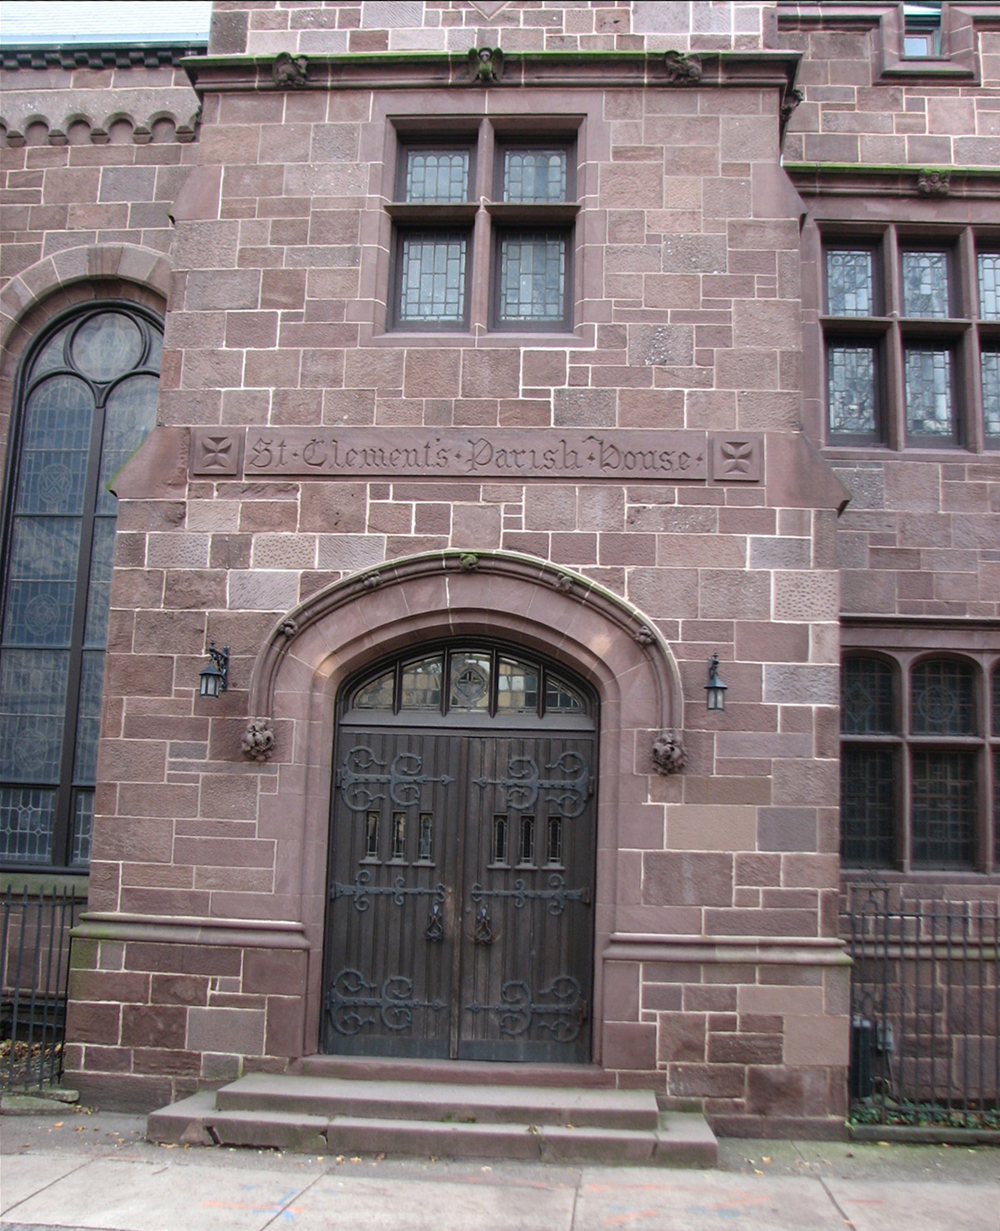 The entrance to St. Clement's Parish House on Cherry Street.